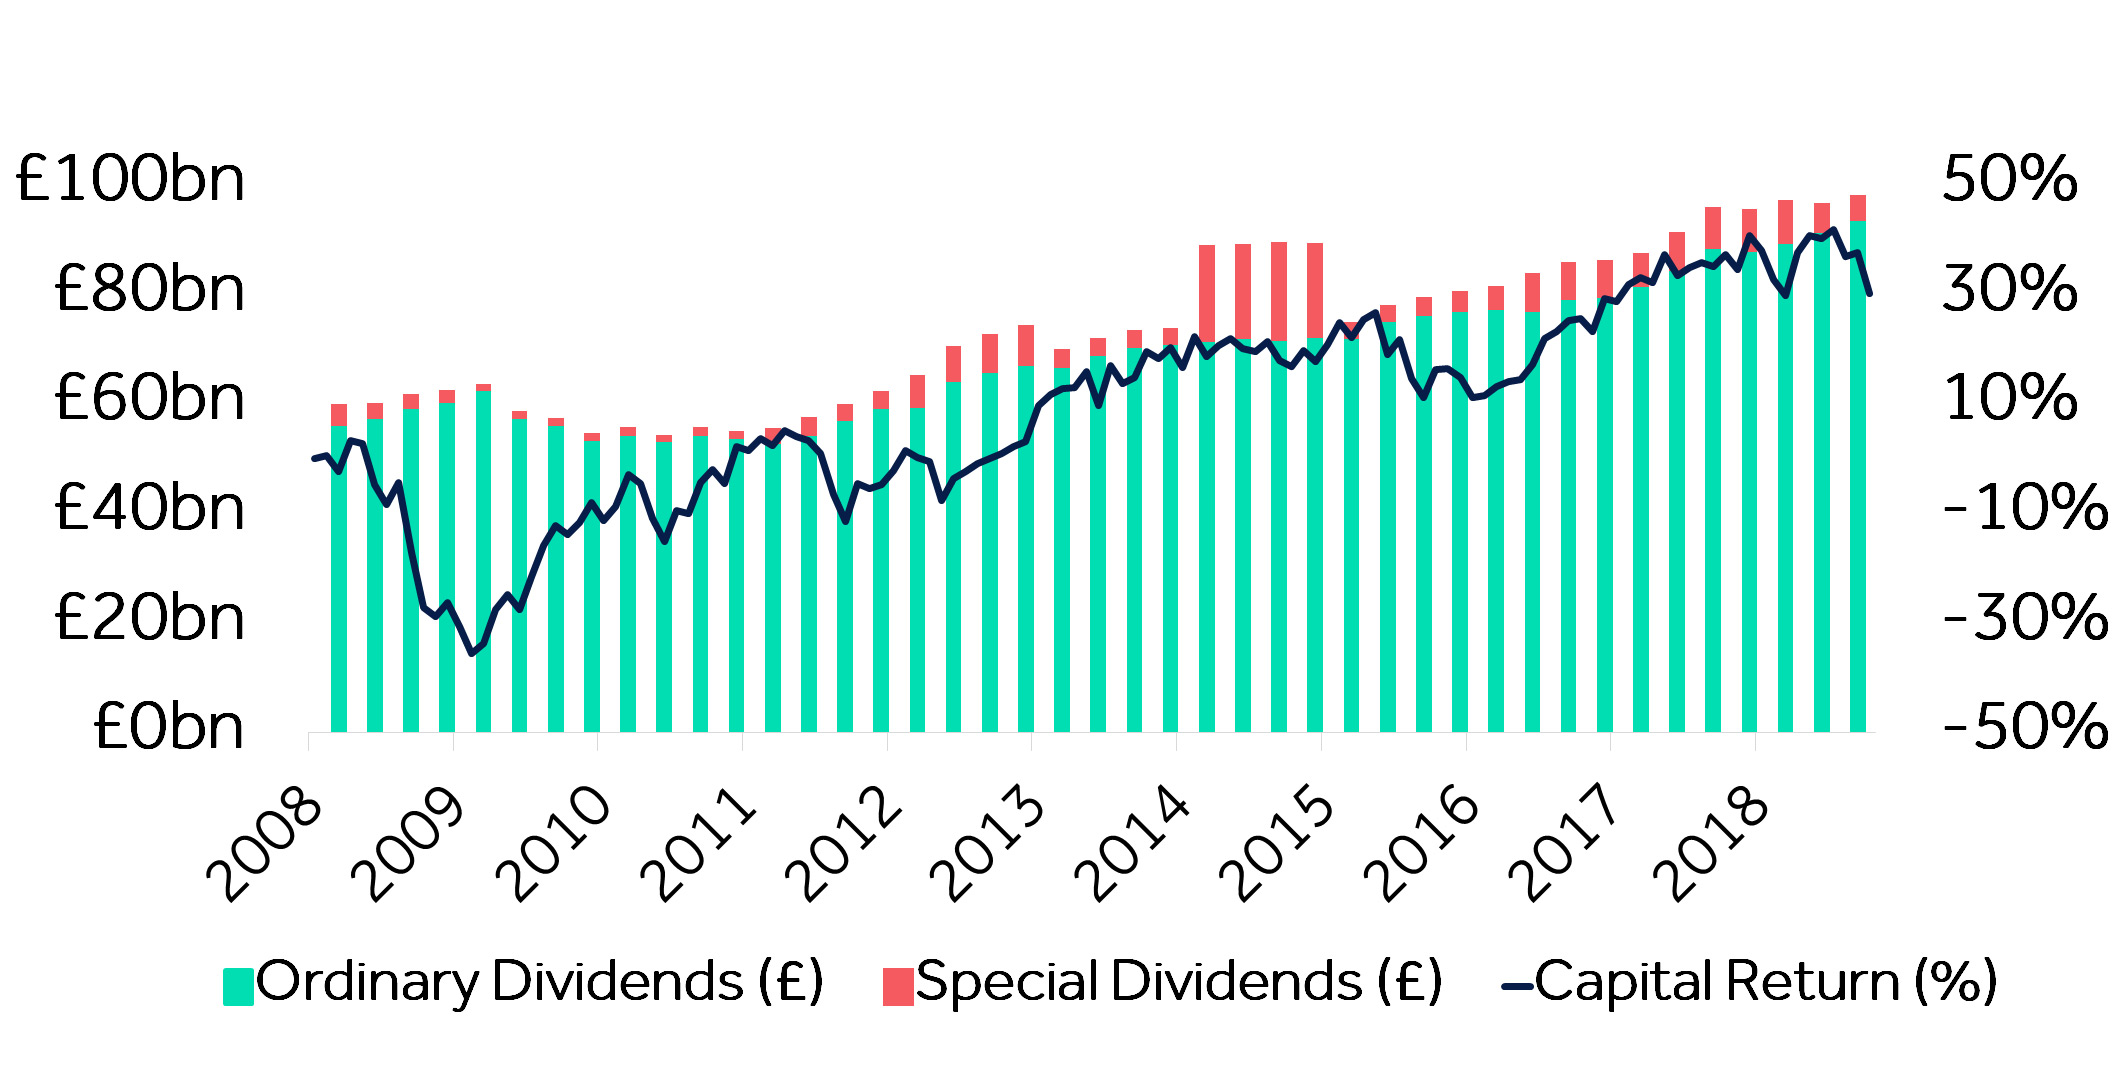 Stock market dividends hit record high | Hargreaves Lansdown